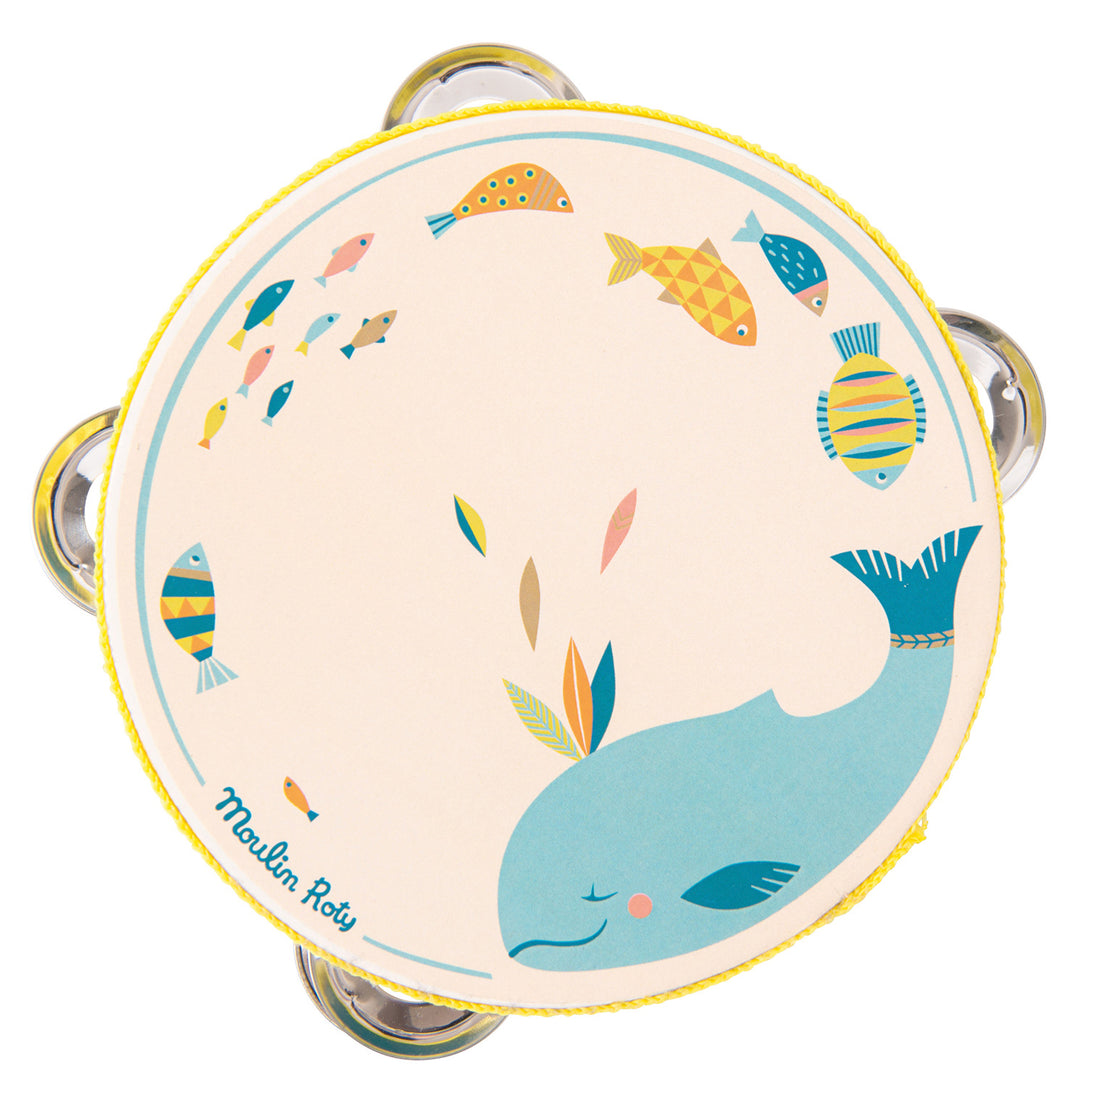 moulin-roty-le-voyage-d-olga-tambourine-14-5cm-packed-6pcs-in-display-unit-moul-714112